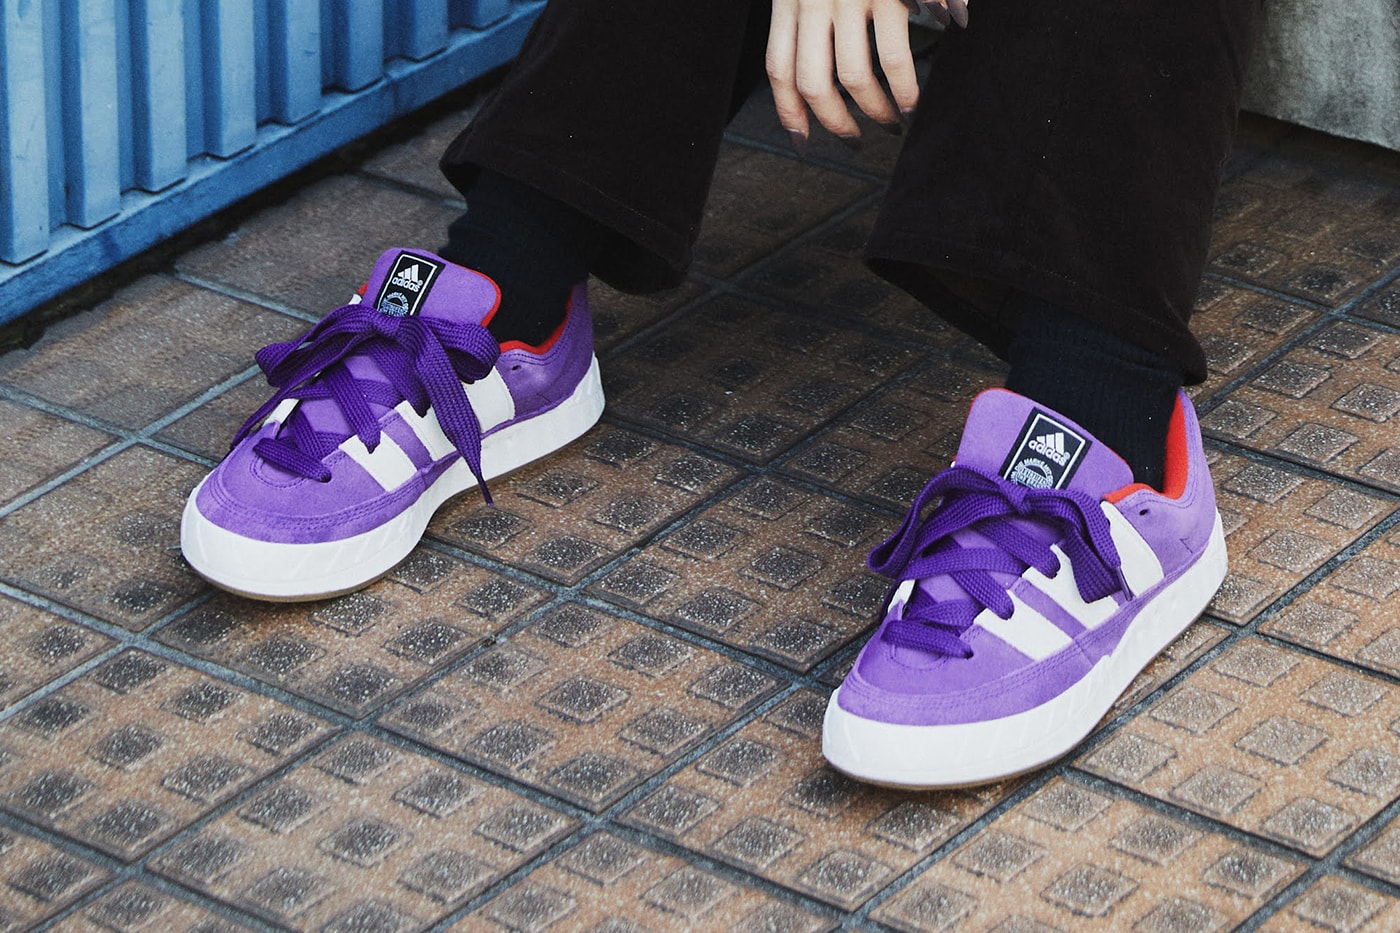 atmos adidas adimatic purple suede fourth colorway harajuku red collaboration release info date price nalu apparel teees